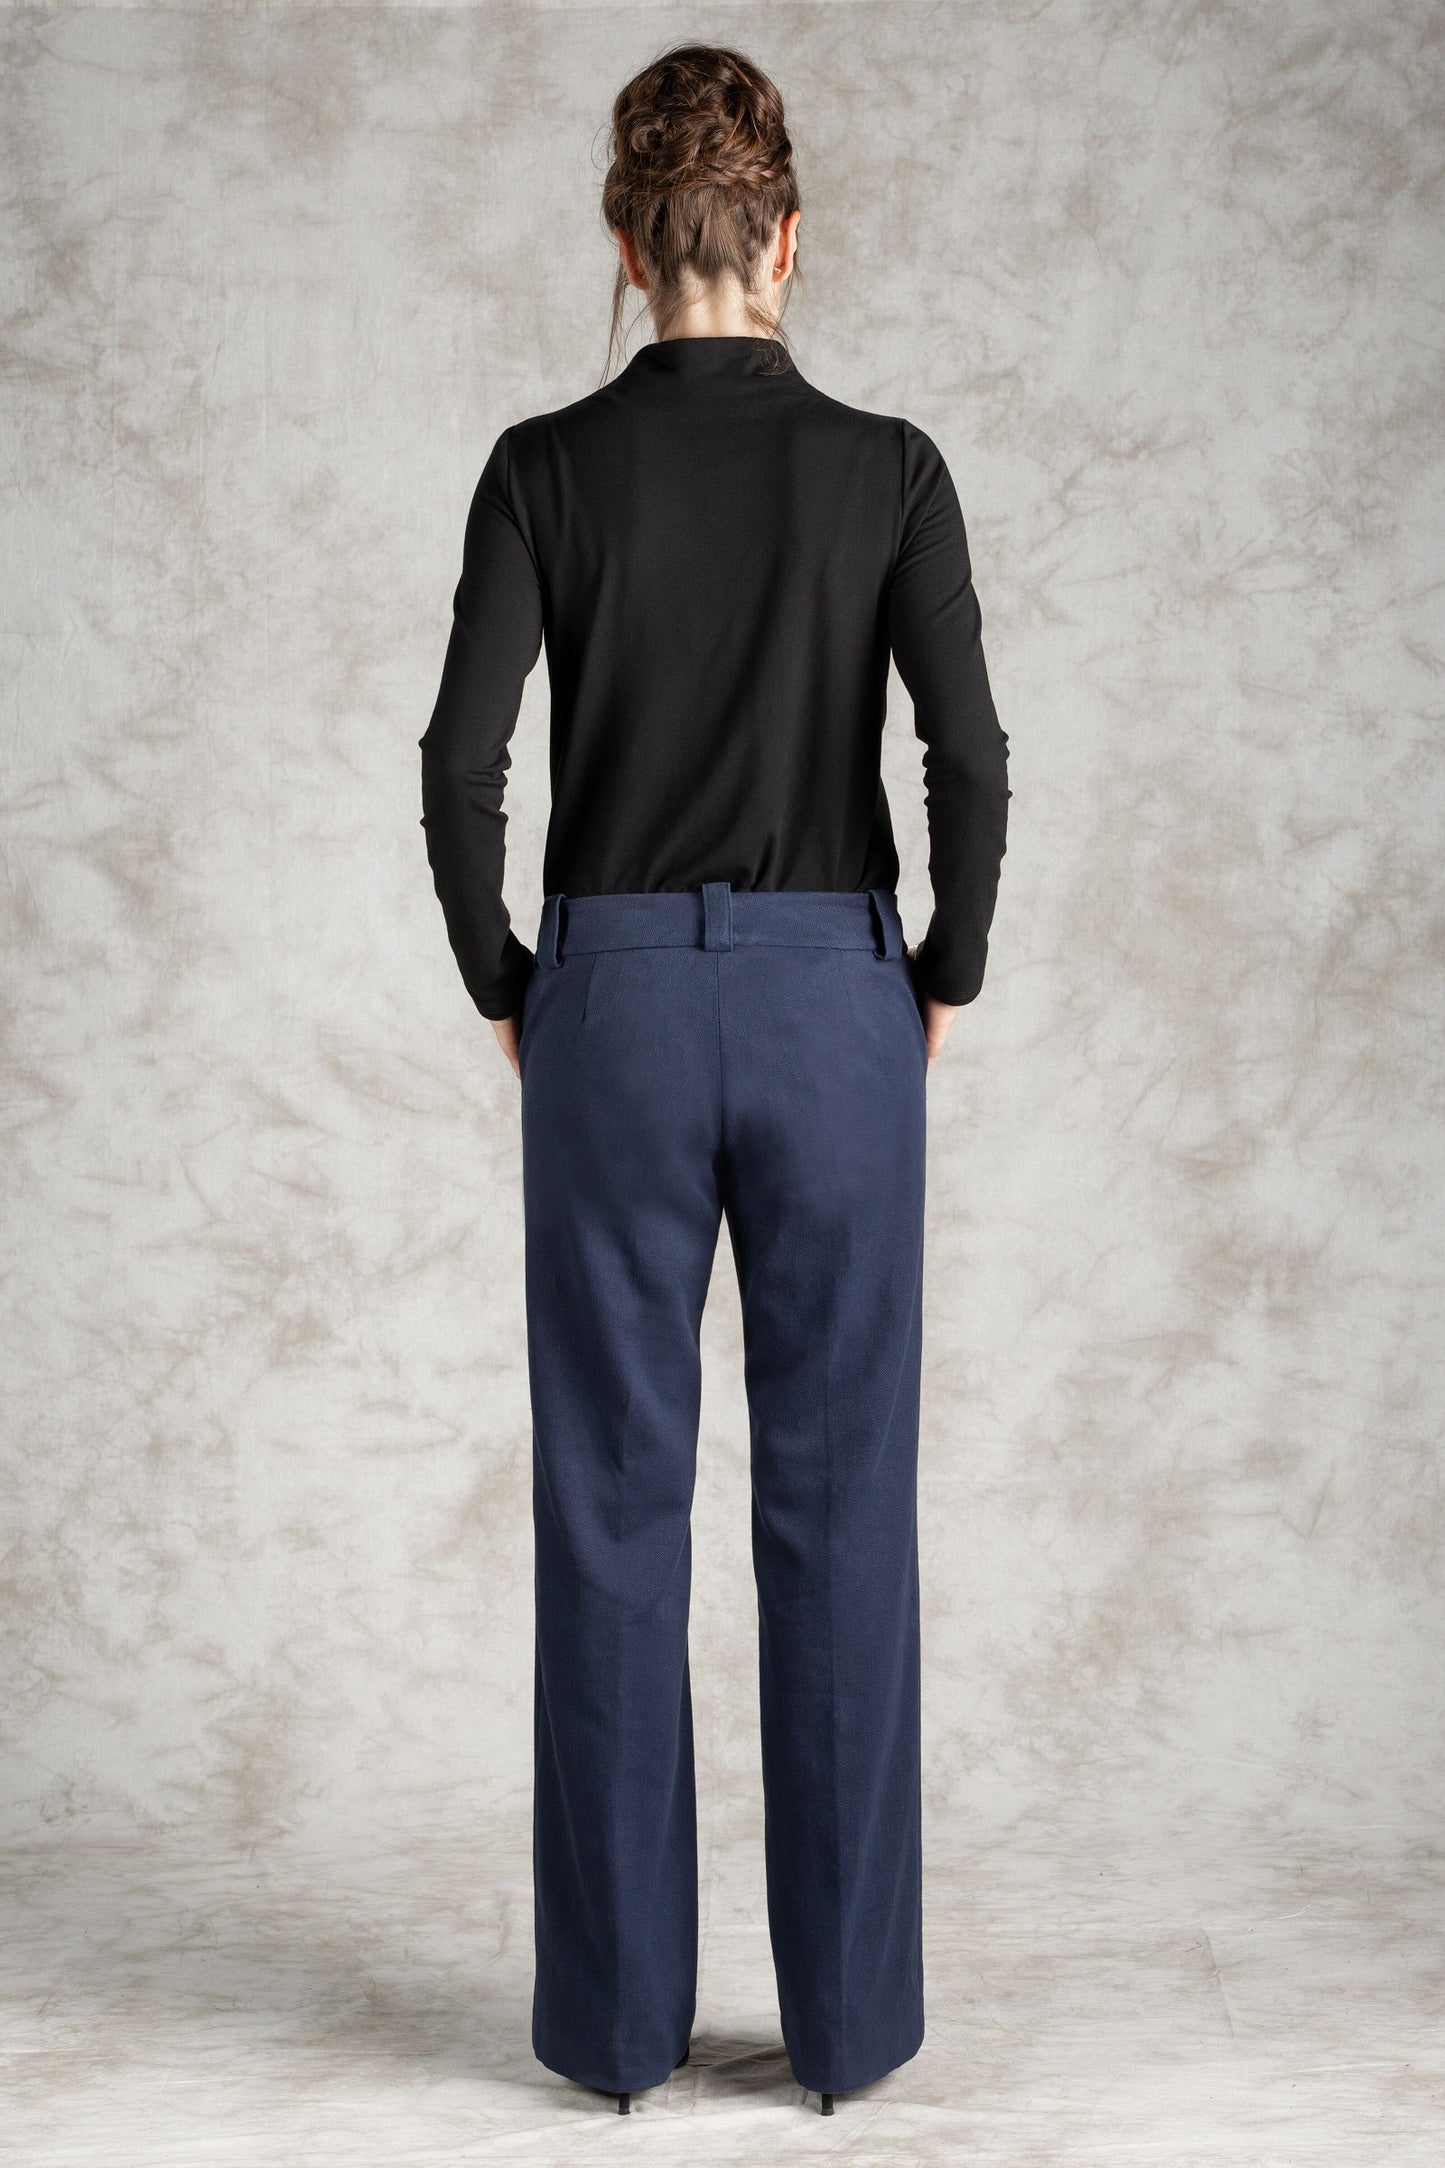 The Pin-Tuck Printed Trouser